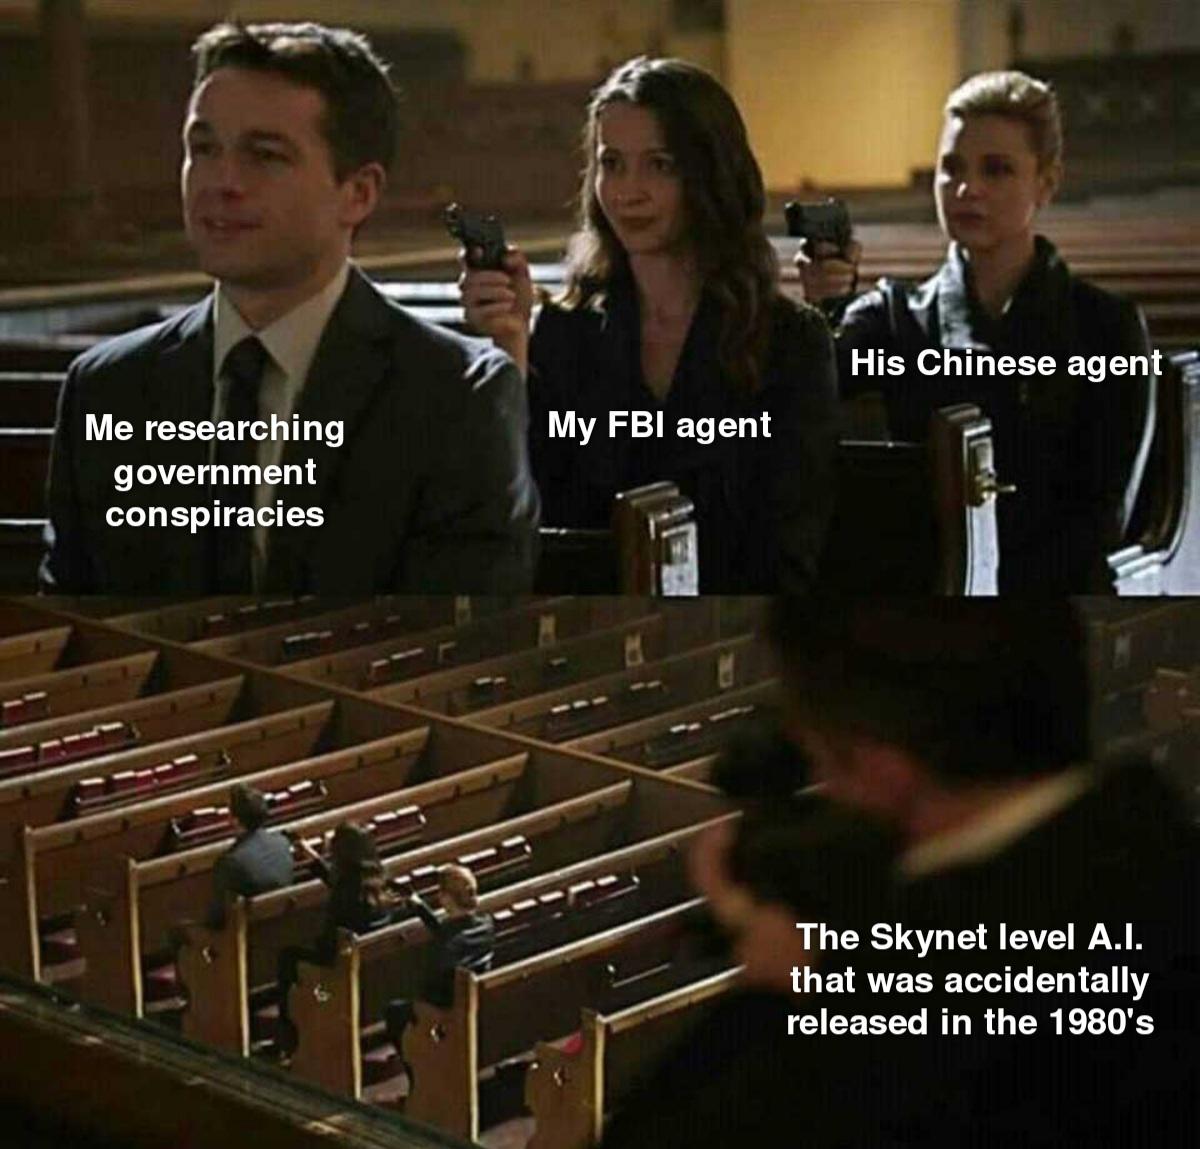 prestige meme - His Chinese agent My Fbi agent Me researching government conspiracies The Skynet level A.I. that was accidentally released in the 1980's